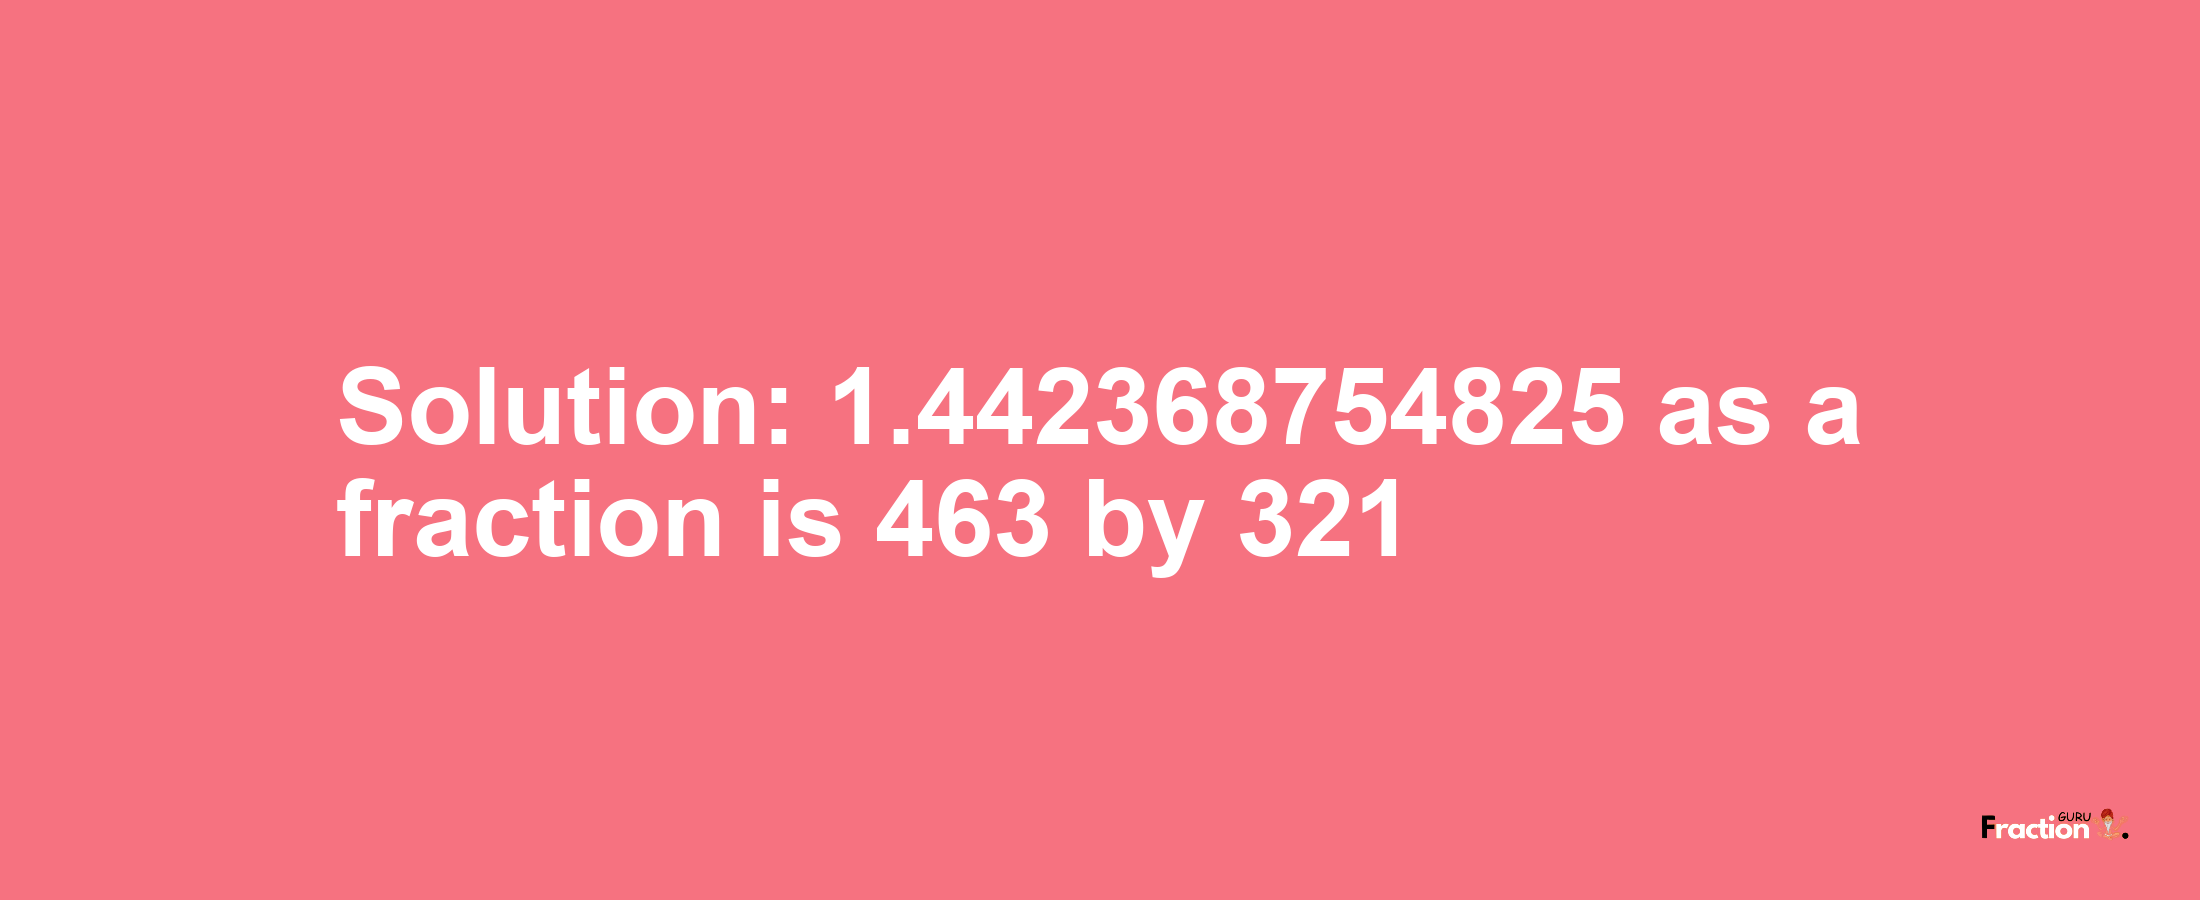 Solution:1.442368754825 as a fraction is 463/321